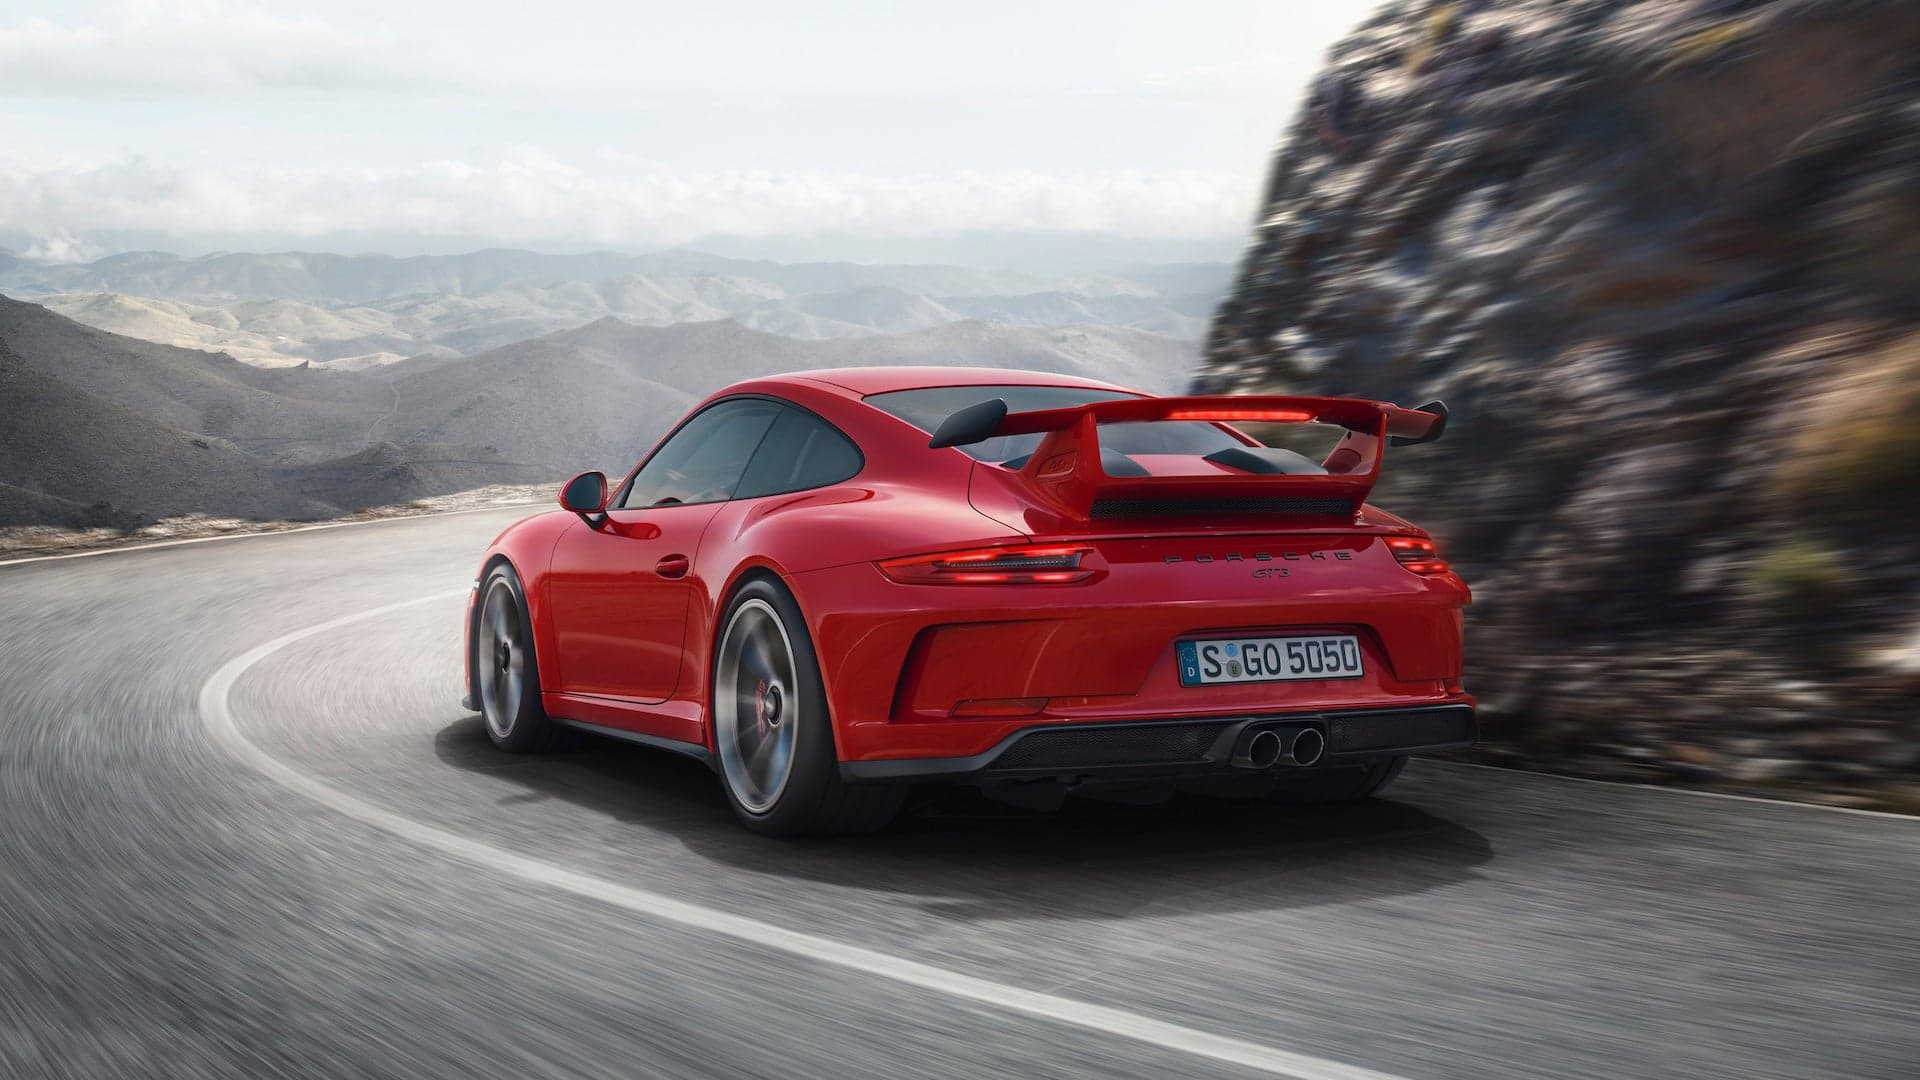 Porsche 911 GT3 Has 500 HP, a Manual Transmission, and a 198-MPH Top Speed